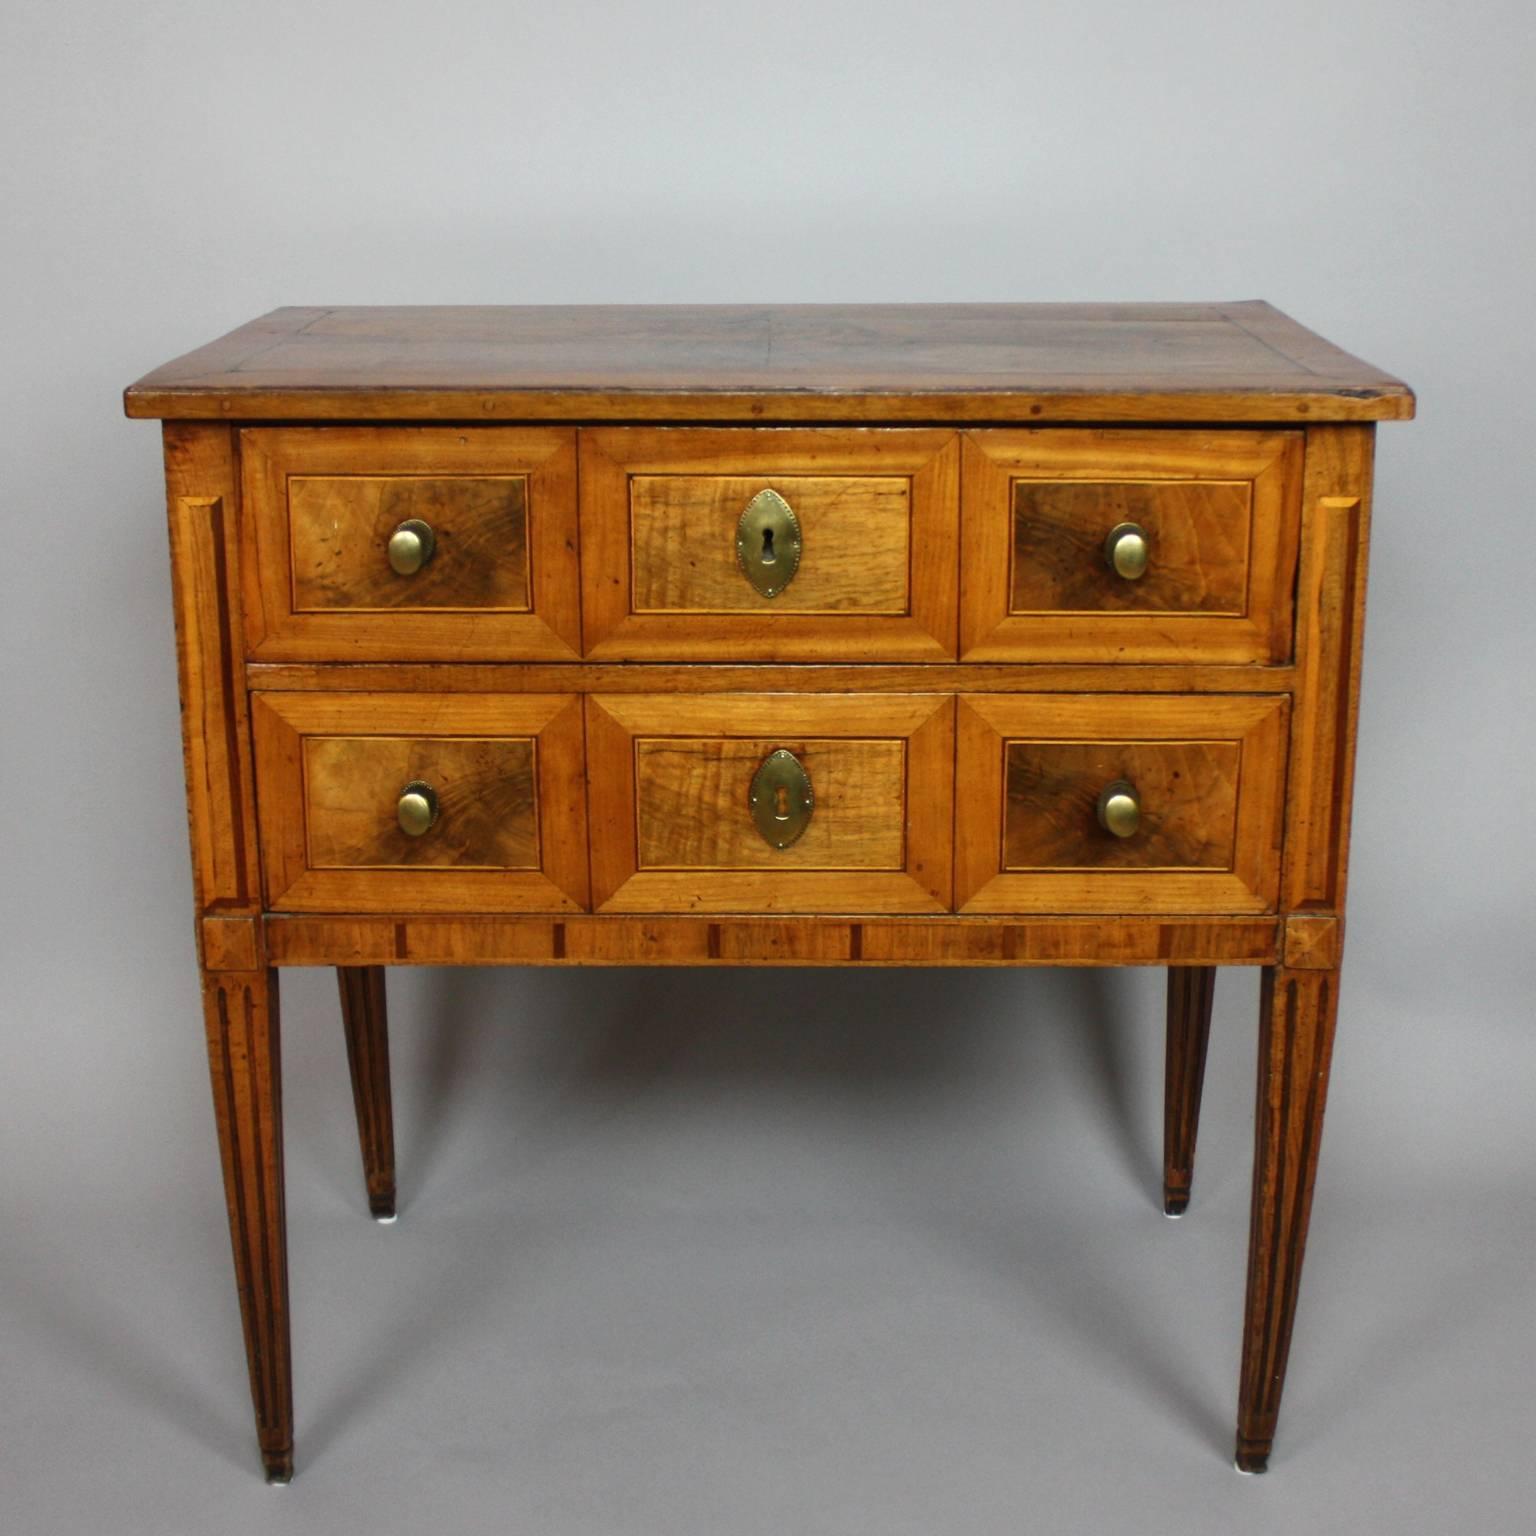 A small German Neoclassical marquetry commode with a rectangular top above two drawers each with three walnut panels and fine banding. With corresponding marquetry on sides and top, on square tapering legs. With brass mounts and a beautifully